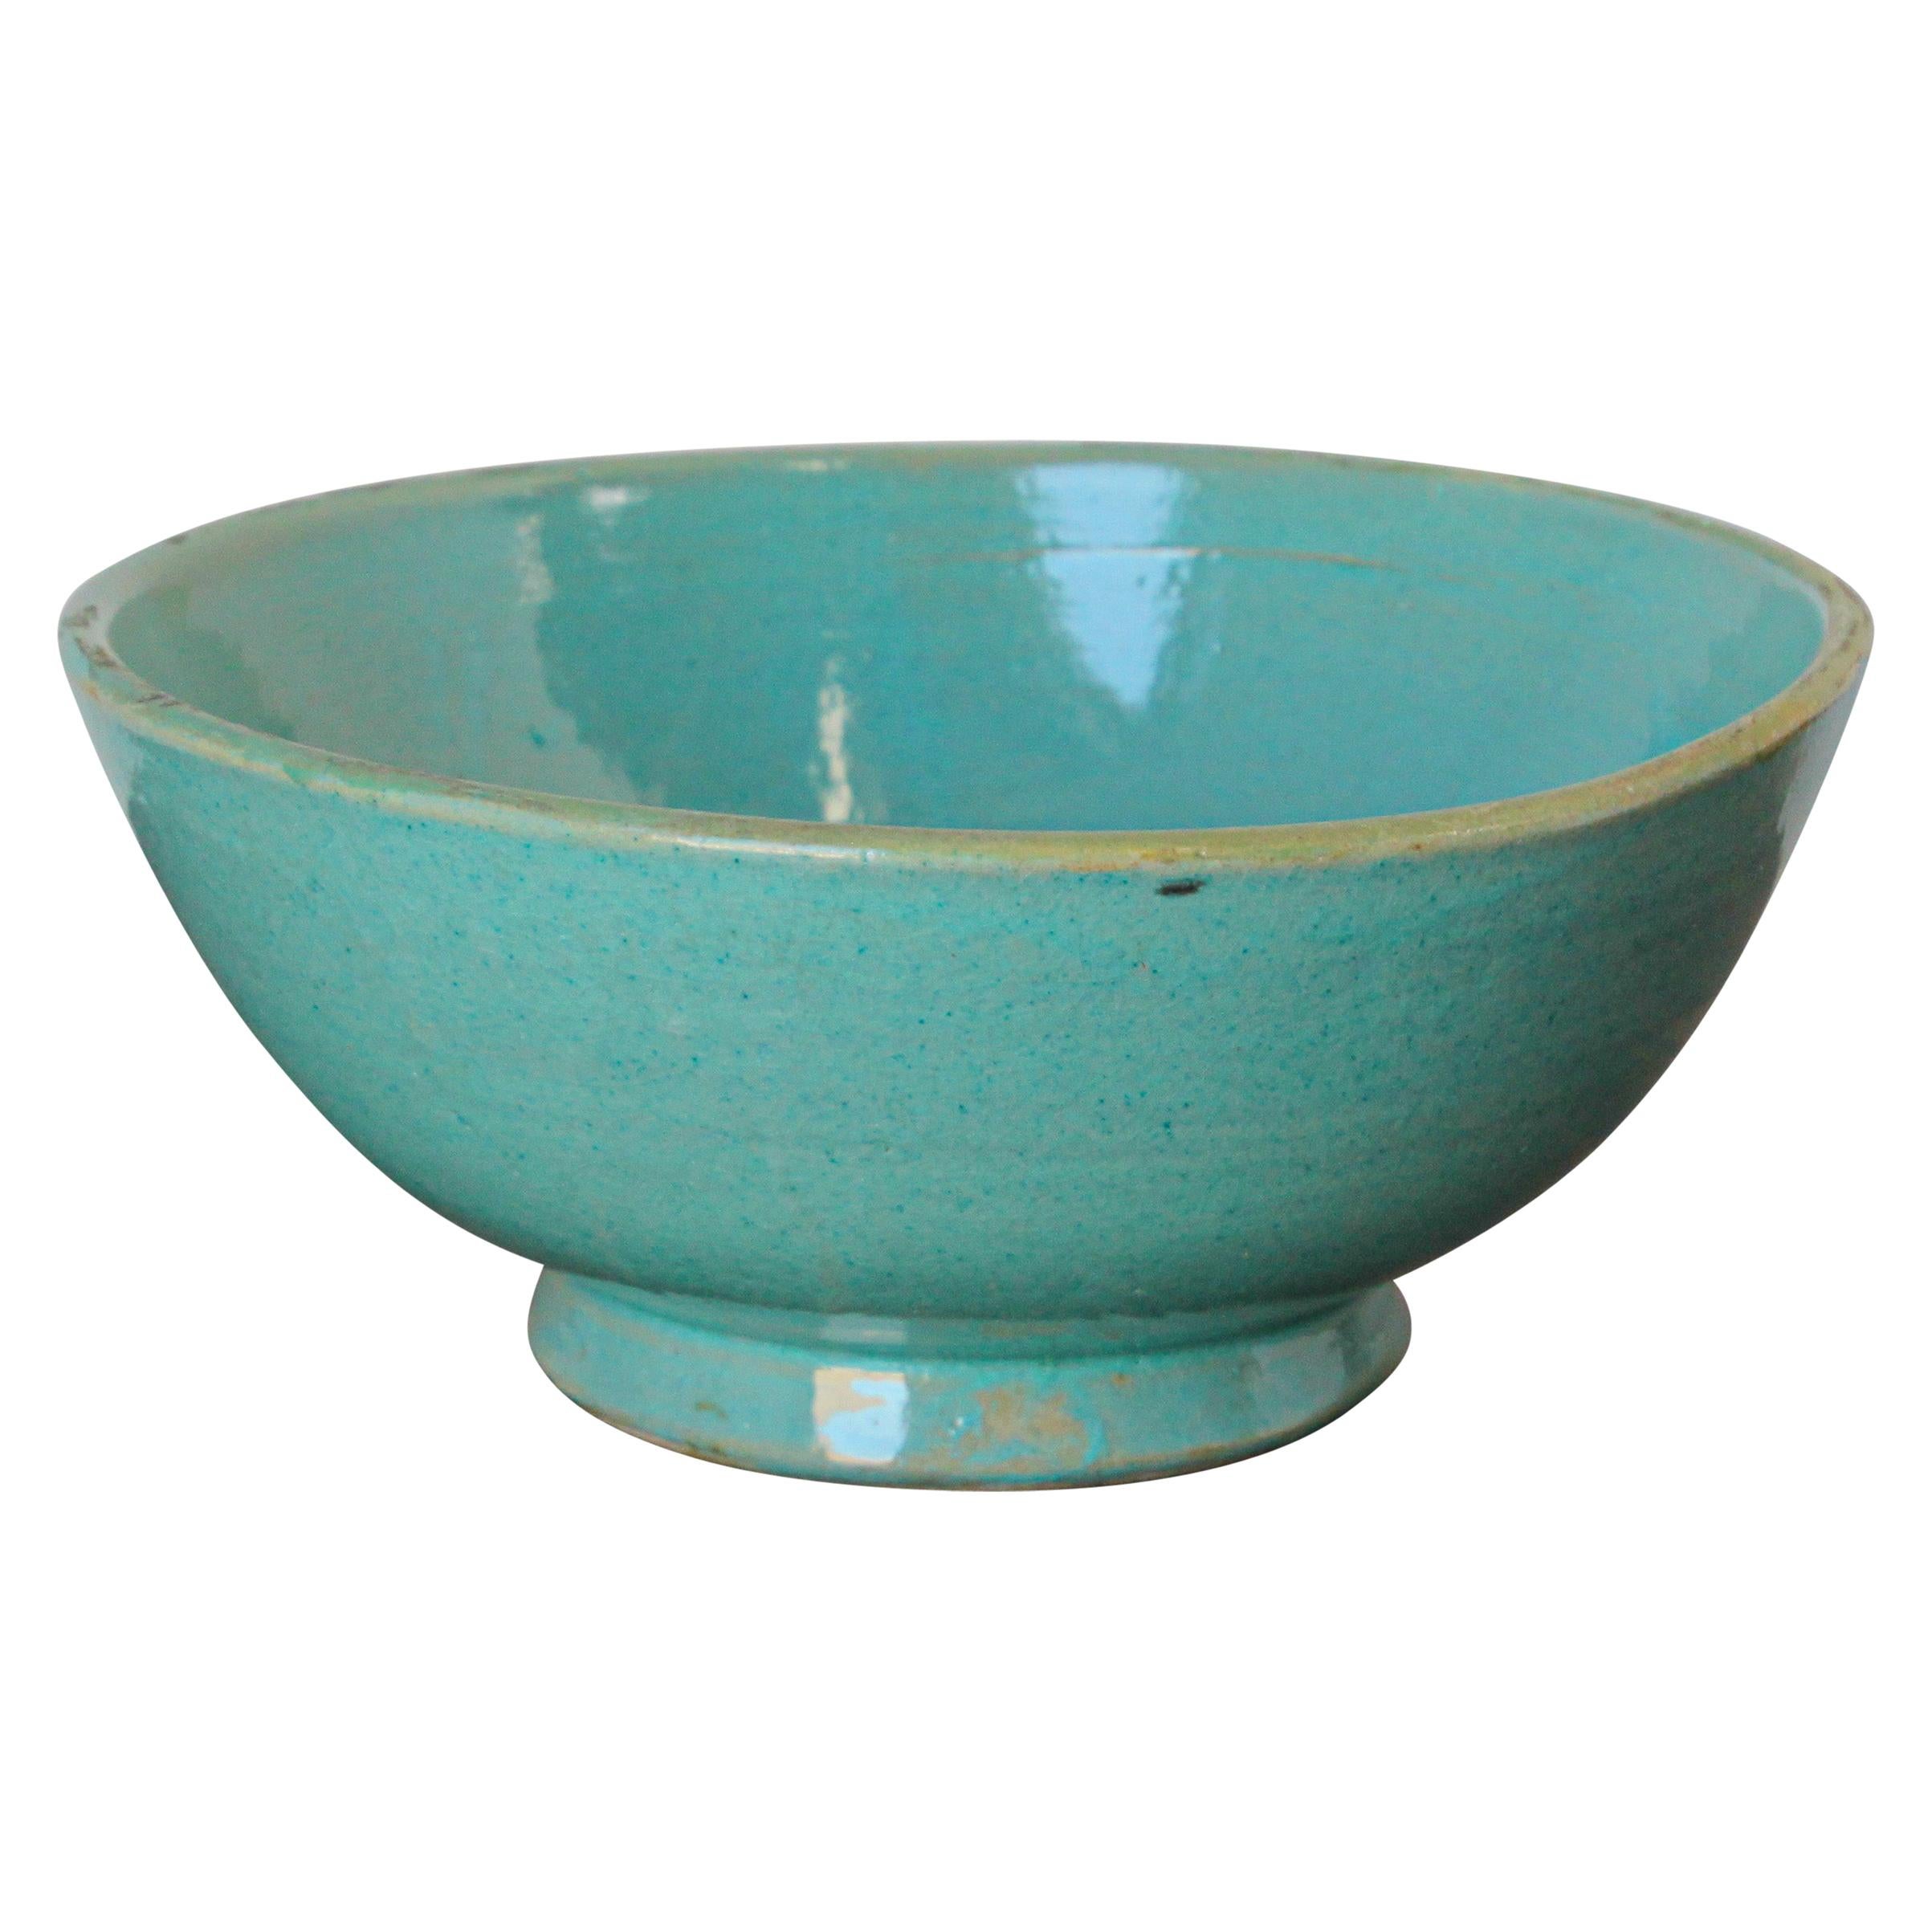 Glazed Teal Color Moroccan Earthenware Dish Bowl